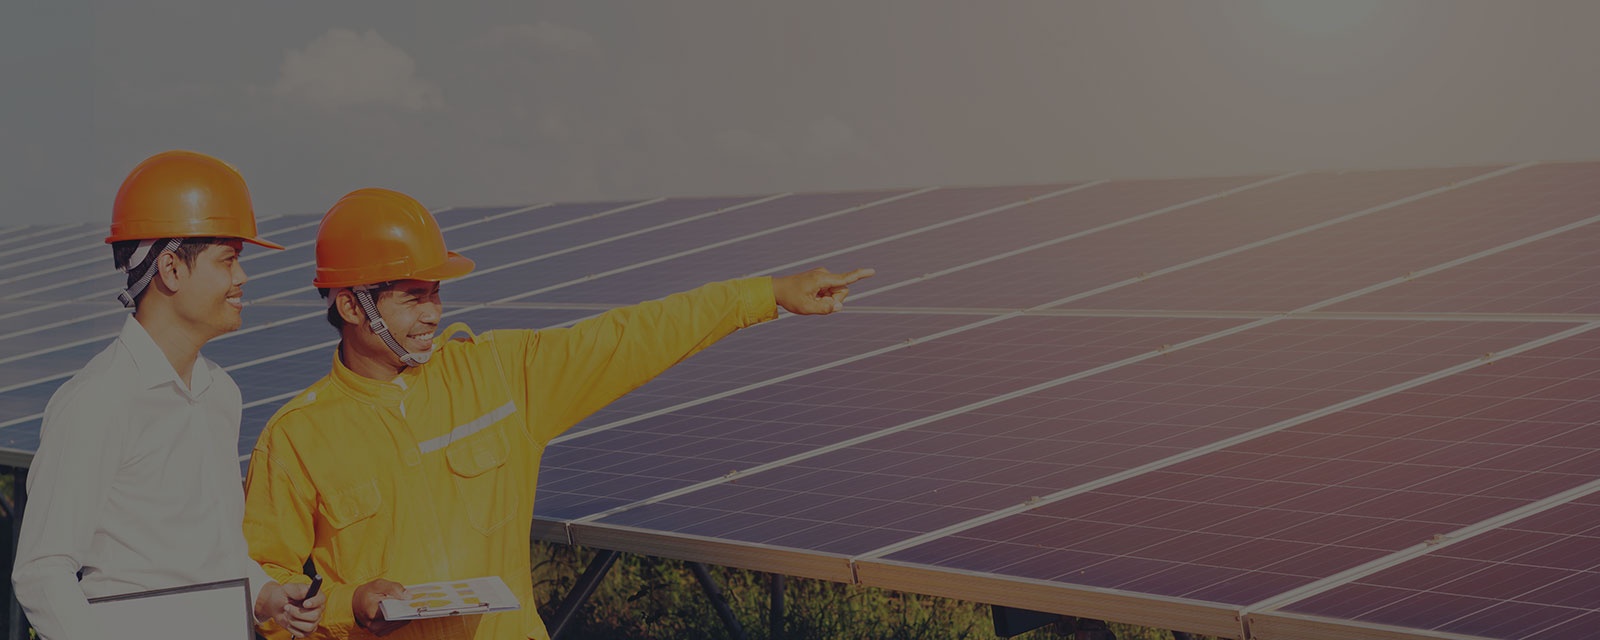 Solar Energy Consultation Services In Windermere